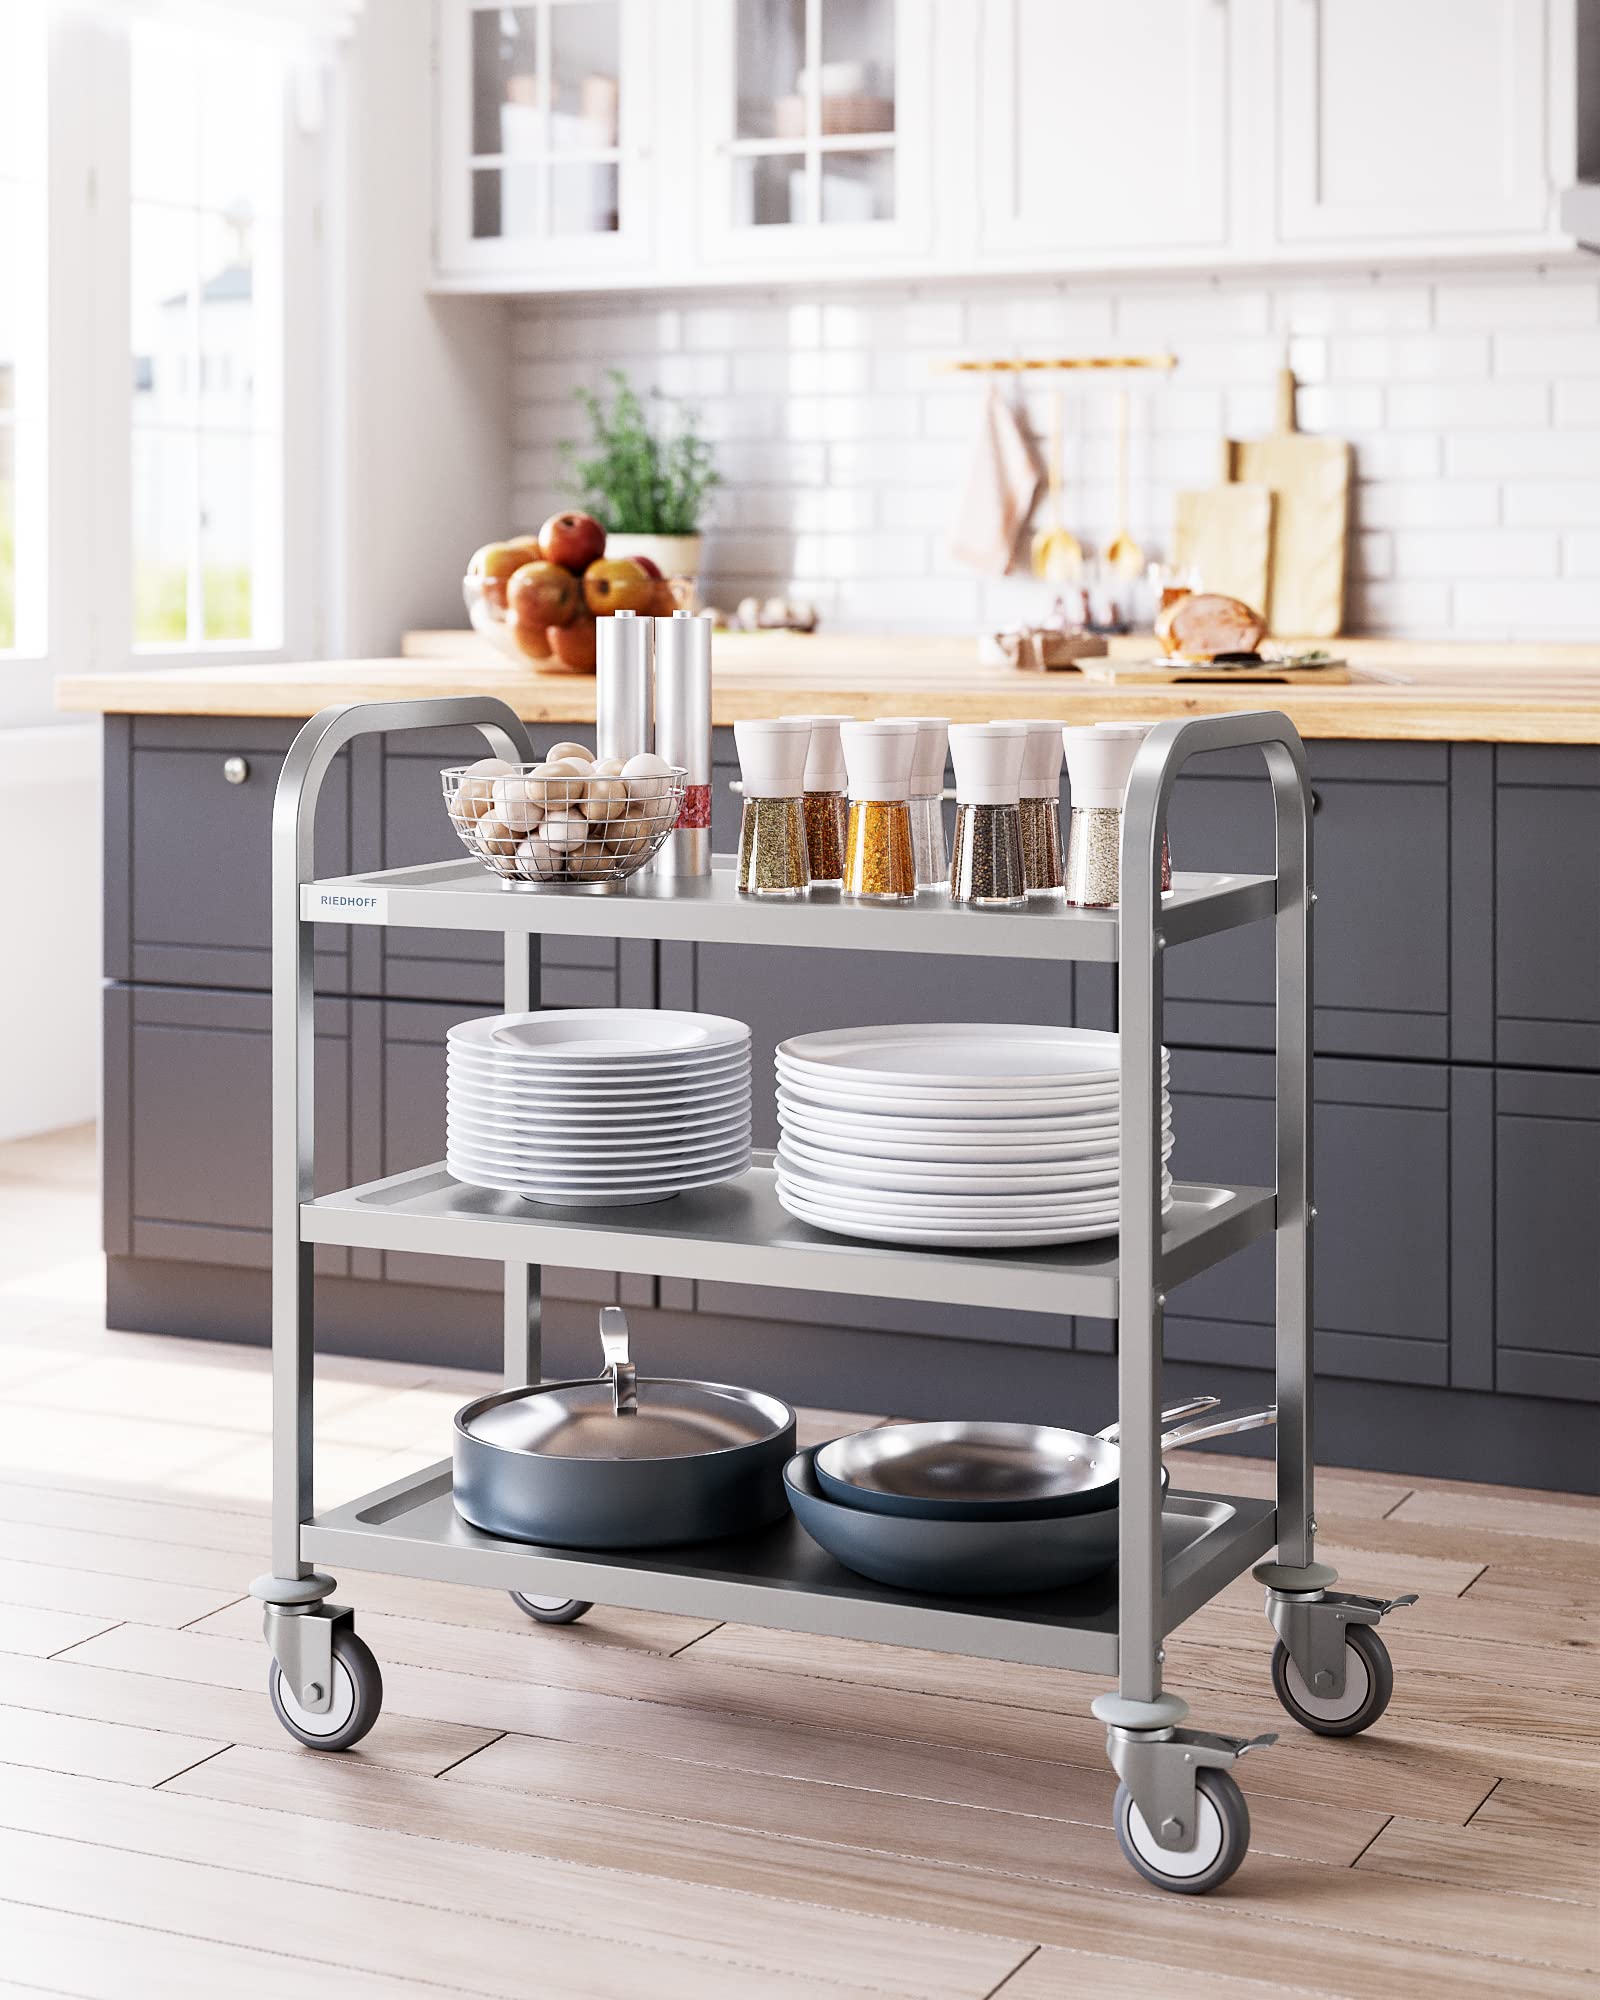 GARVEE 430 Stainless Steel Heavy Duty Utility Cart 3 Shelves Service Carts with Wheels Silver